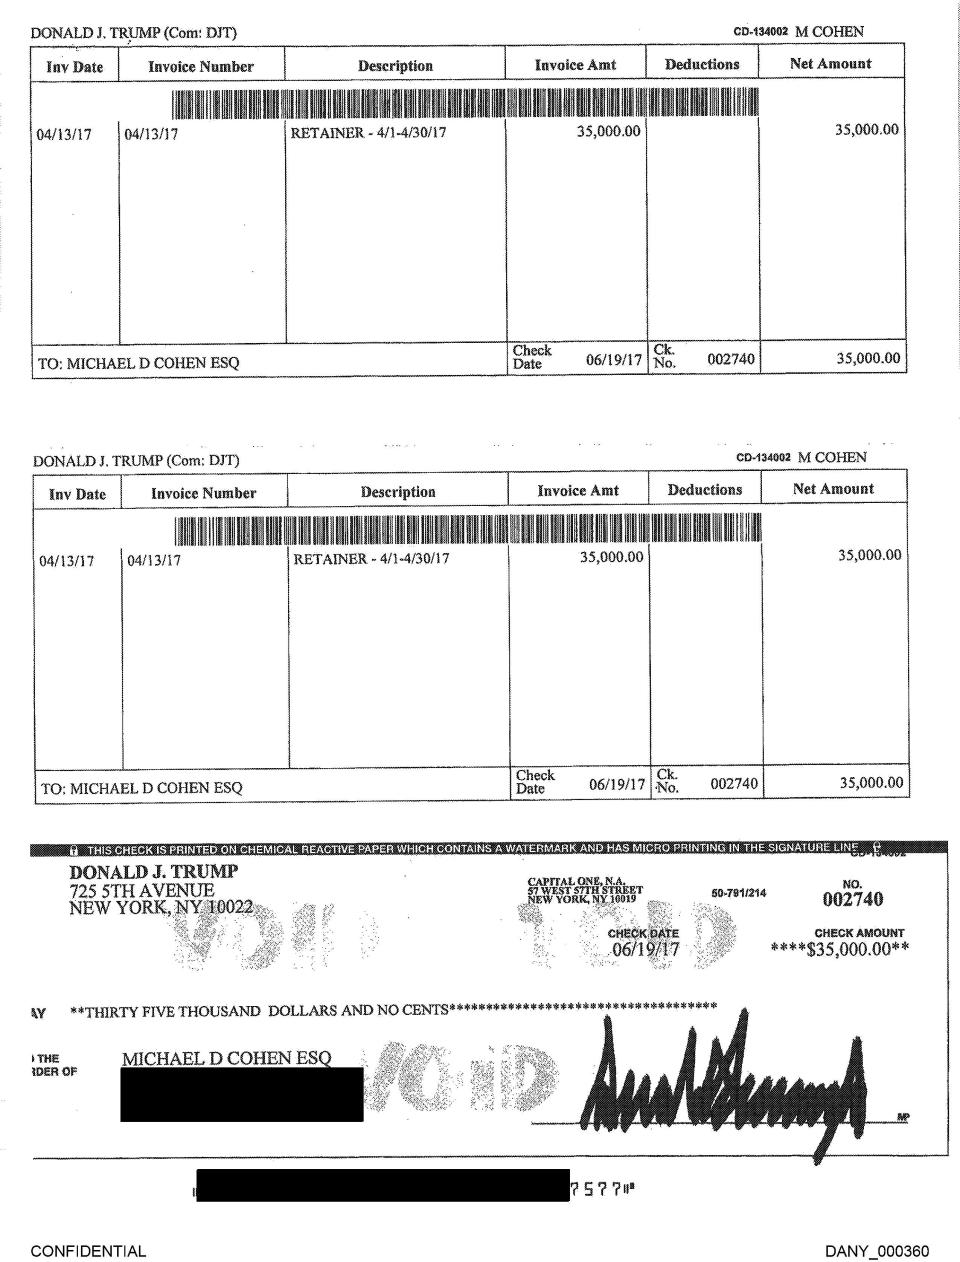 People's exhibit 10 shows a check allegedly signed by Trump for an April 2017 submitted by Michael Cohen.